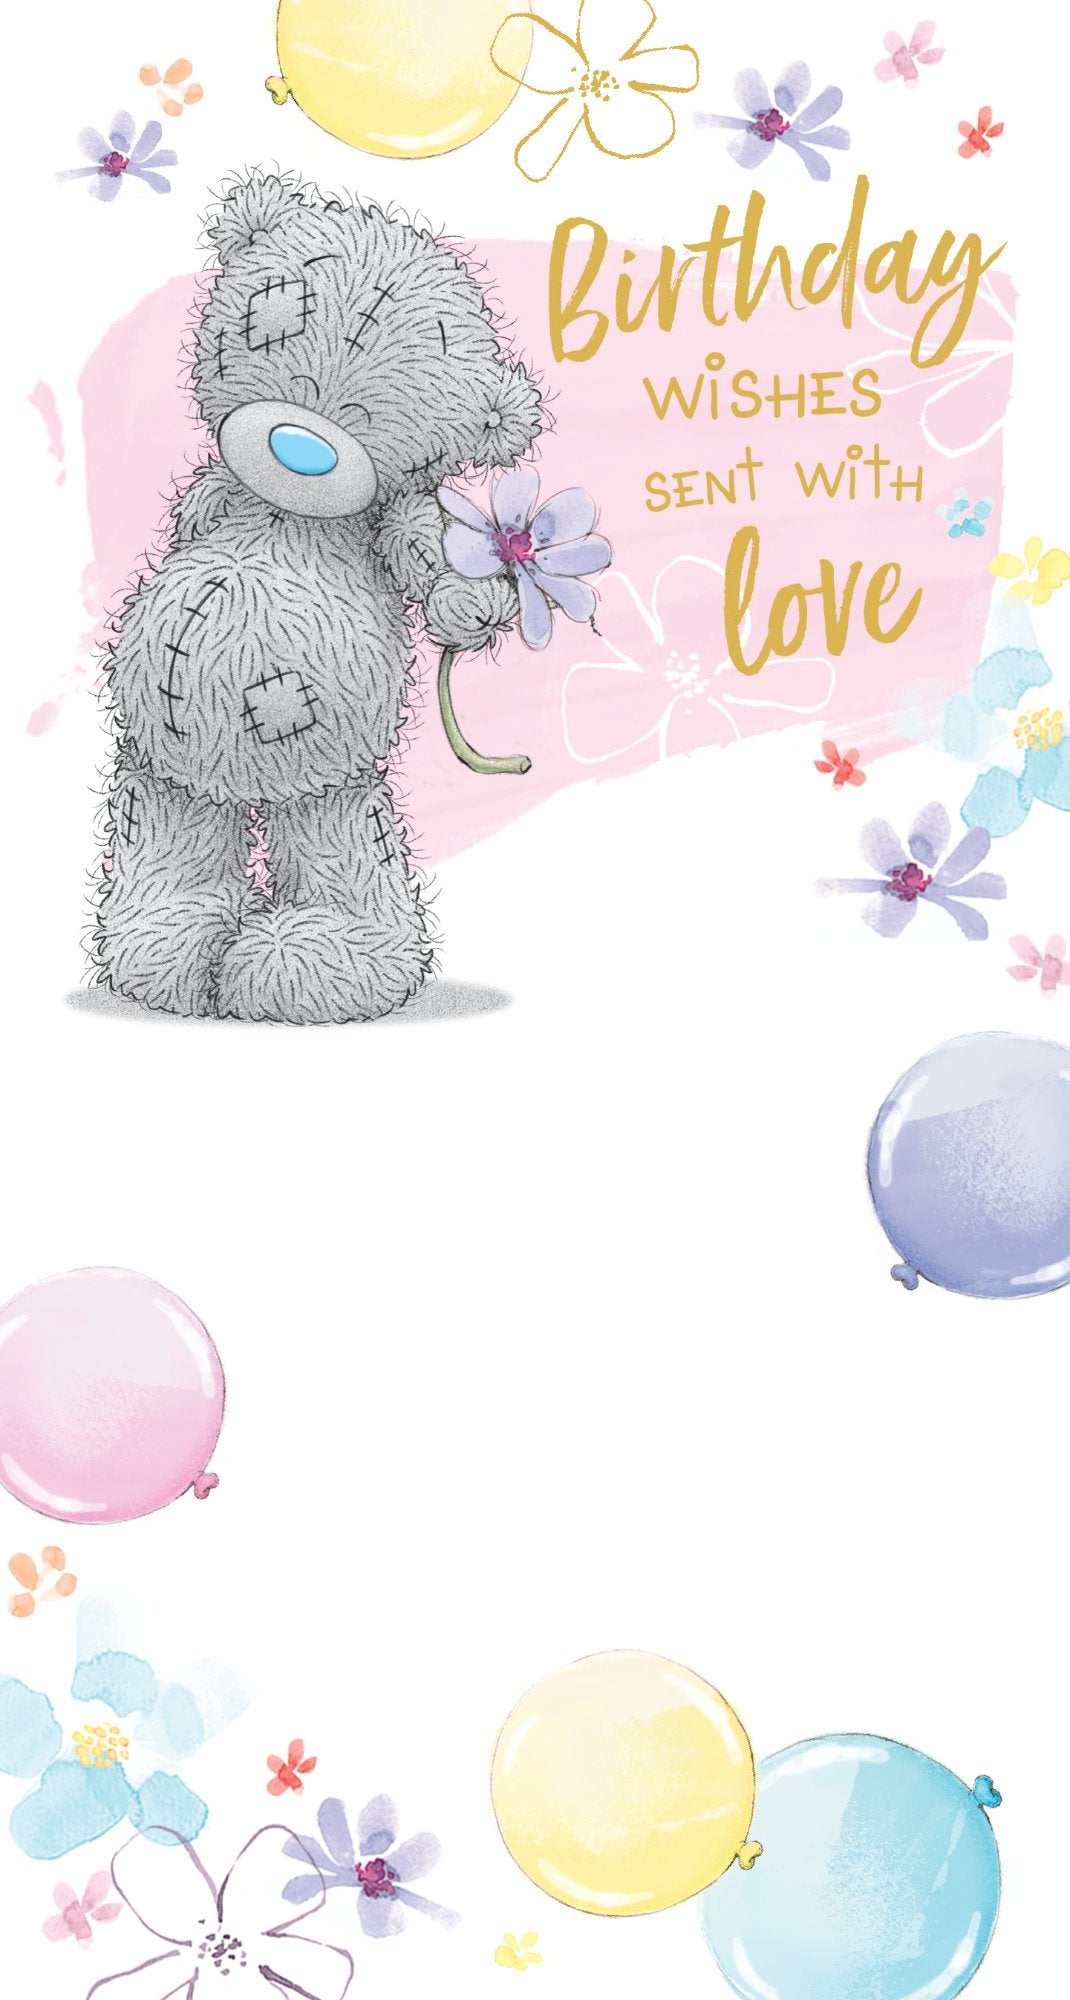 Photograph of Bear Holding Flower Greetings Card at Nicole's Shop